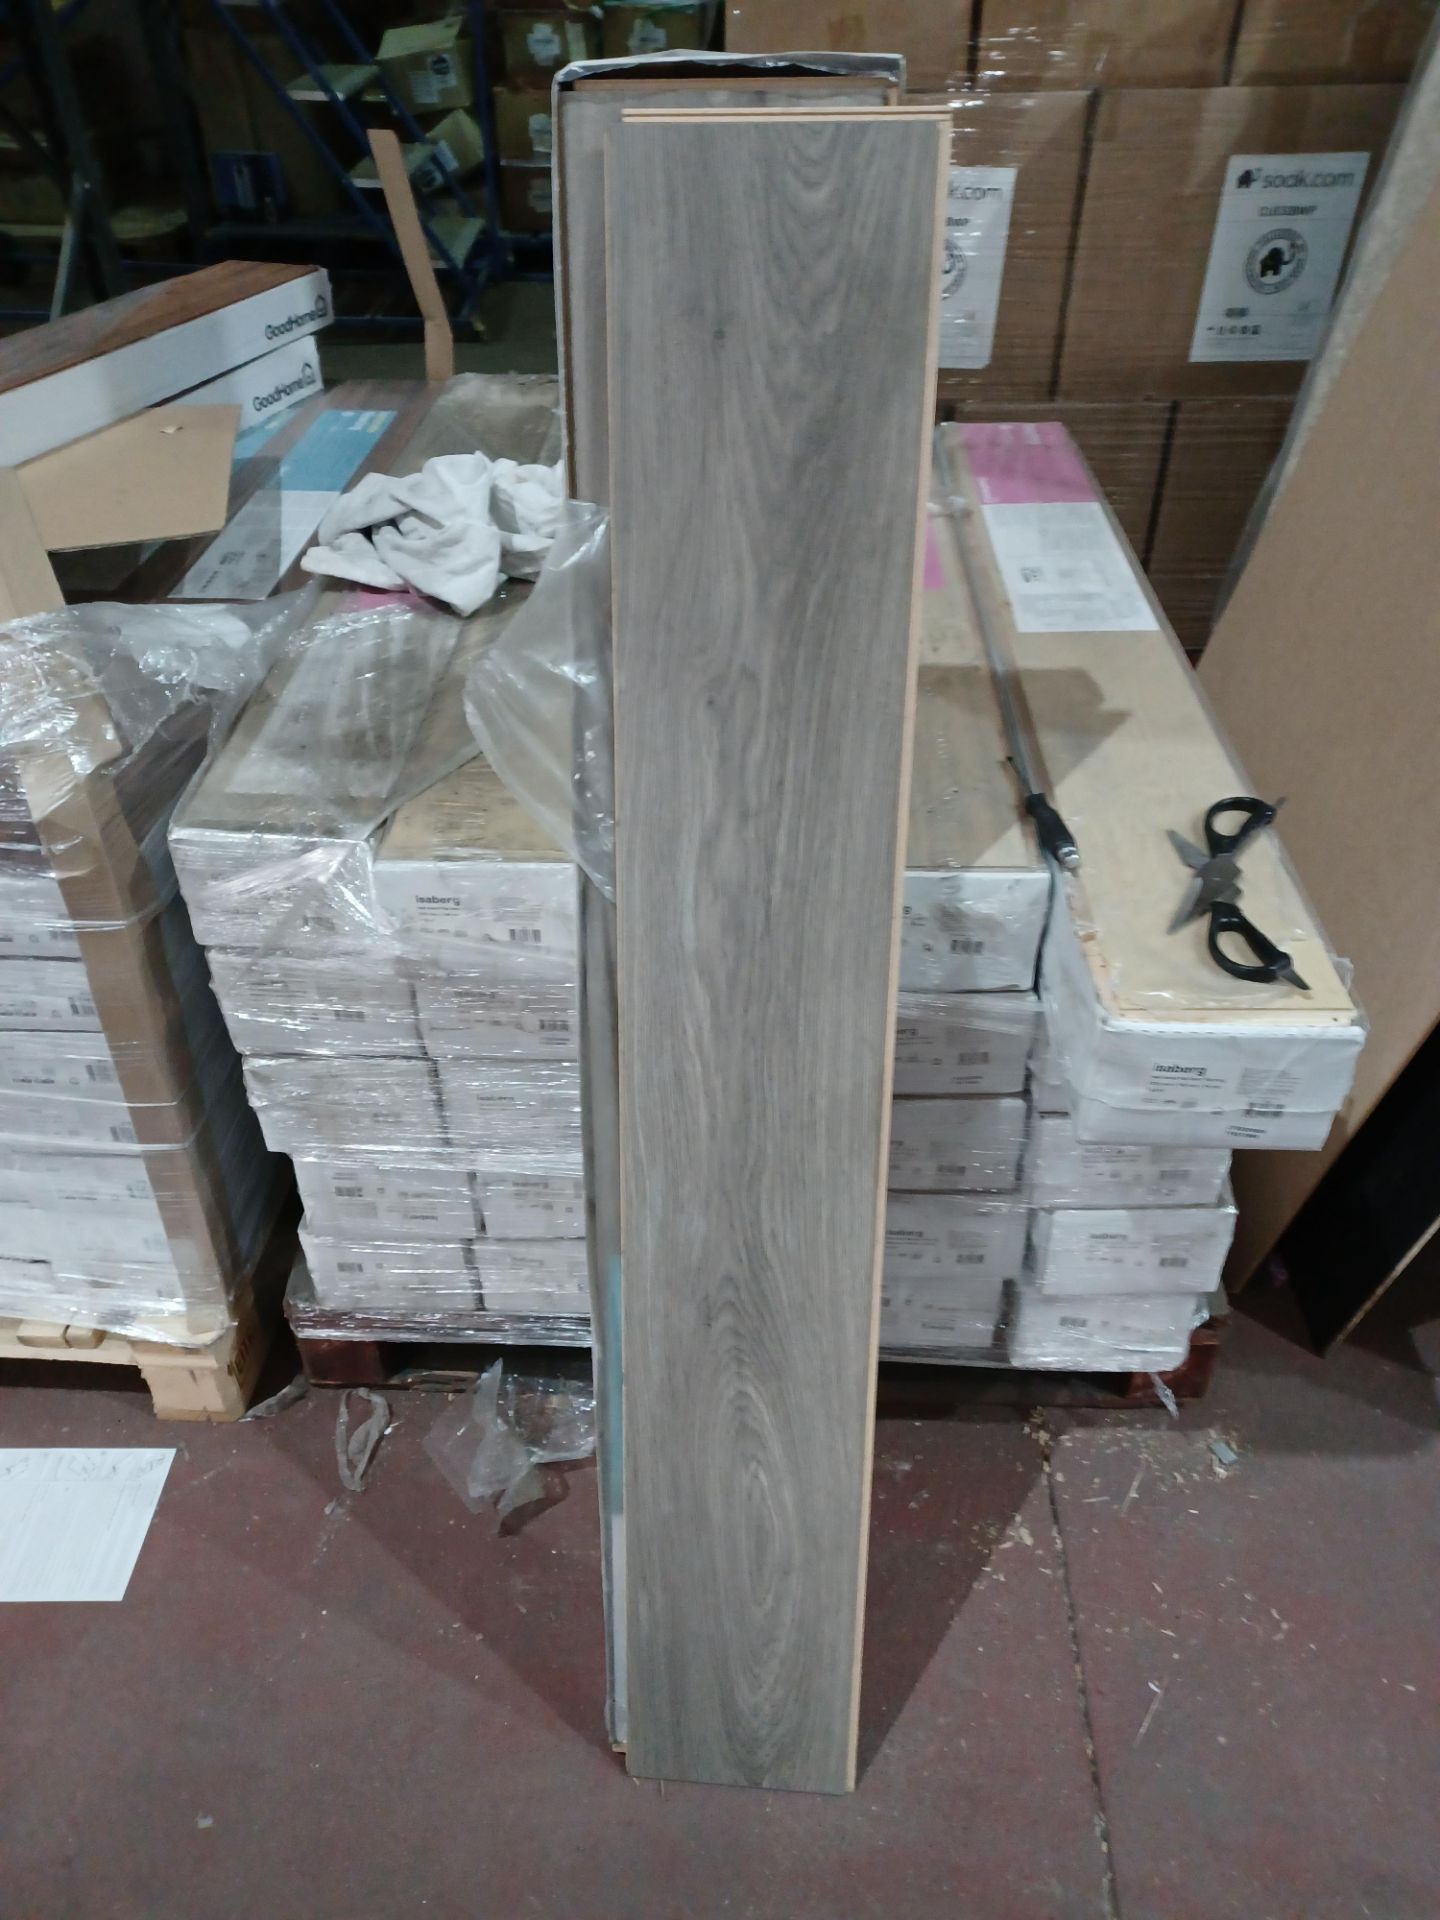 12 X PACKS OF Oldbury Grey Oak effect Laminate Flooring. EACH PACK CONTAINS 1.73m2, GIVING THIS